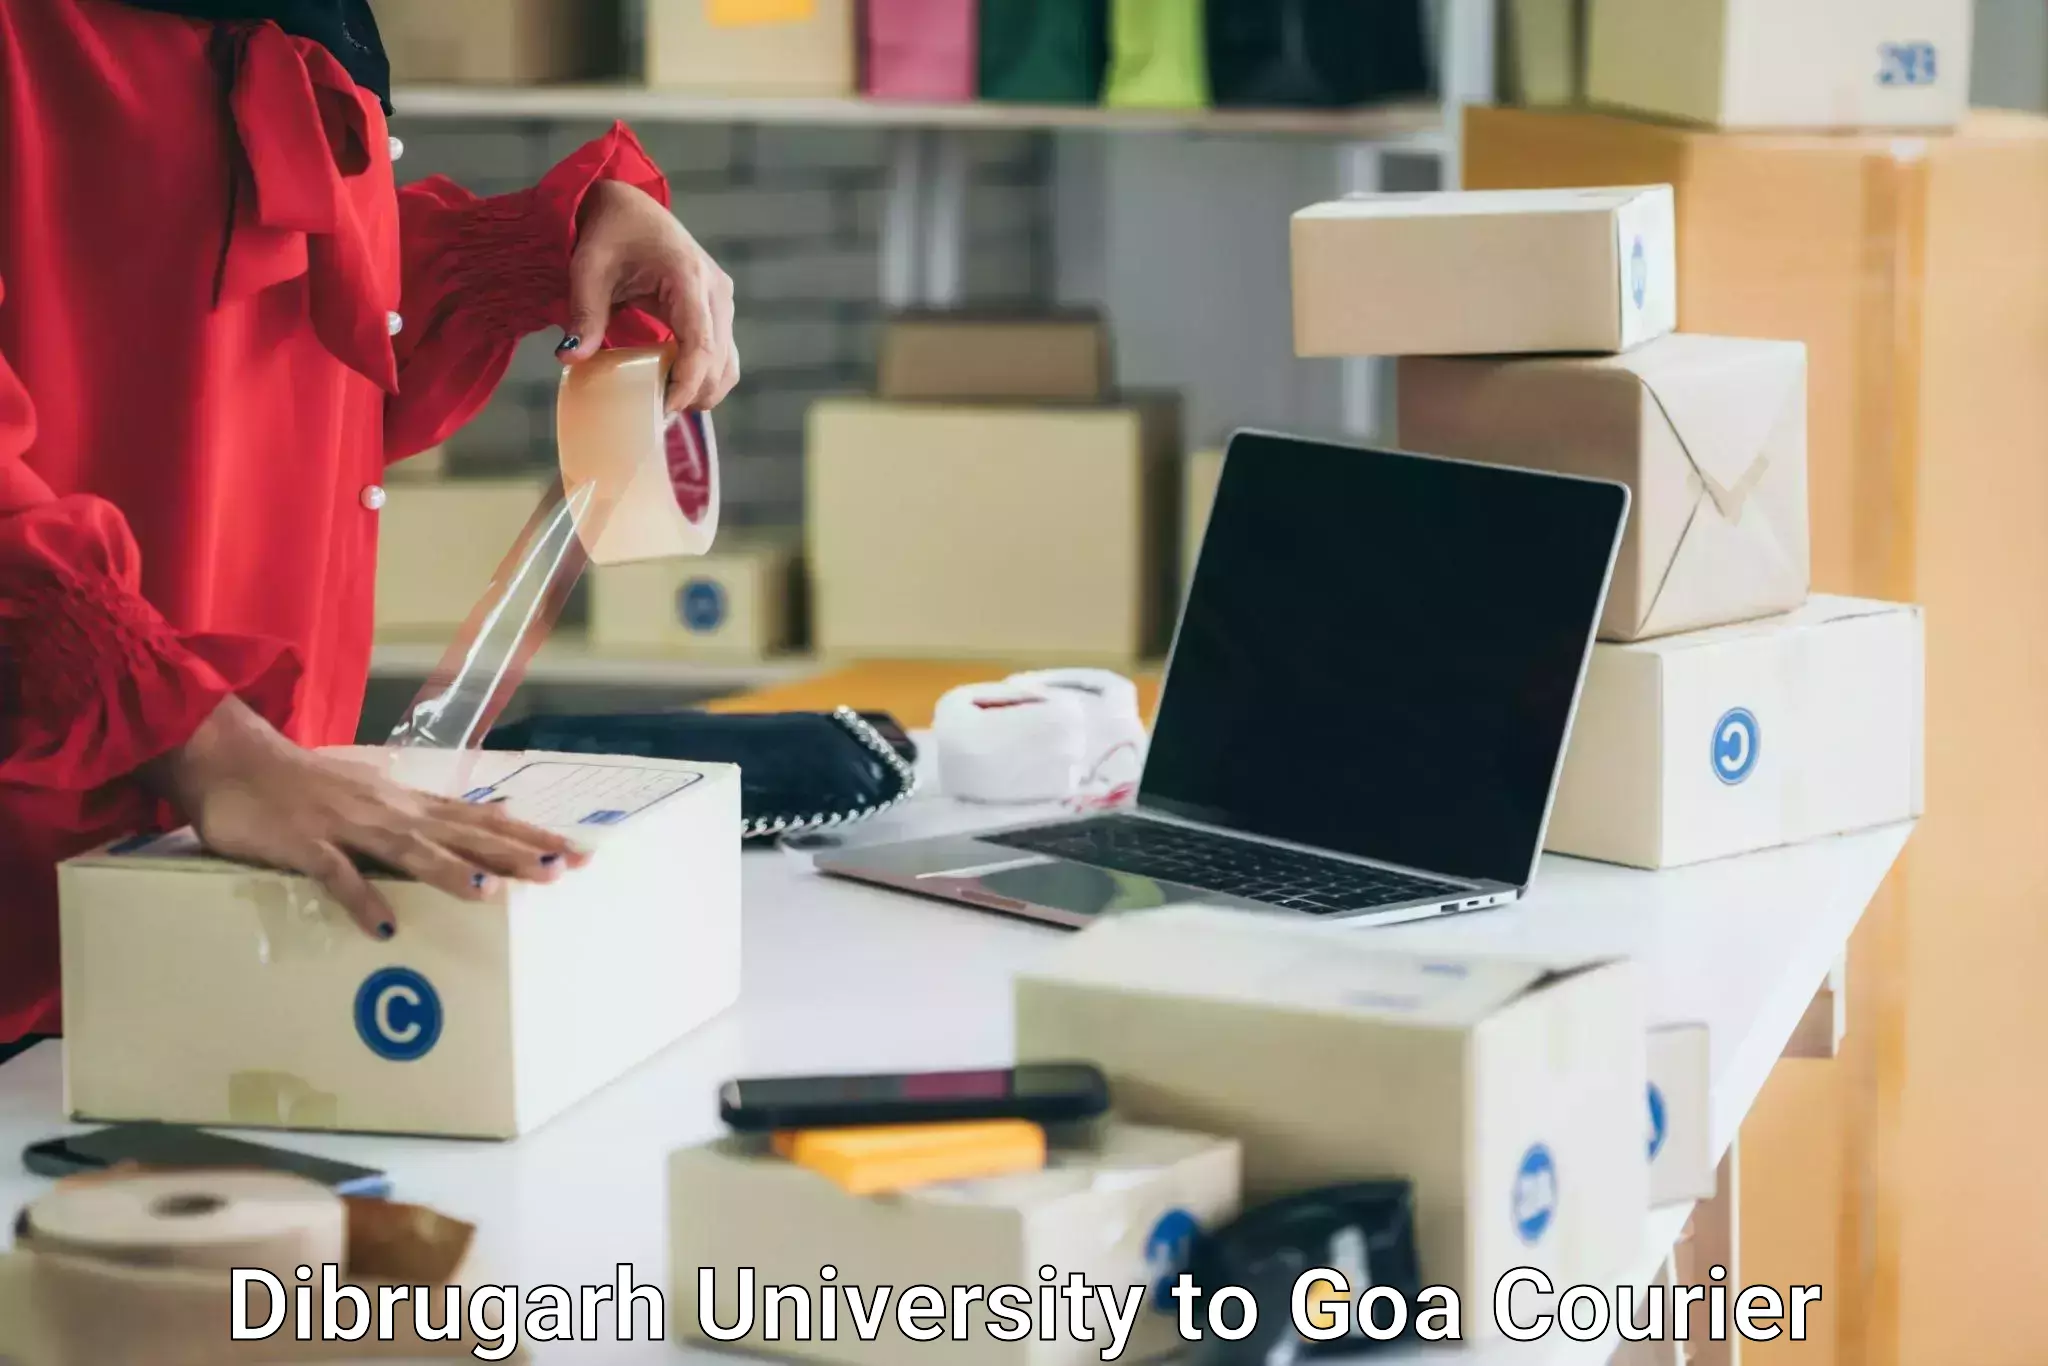 Quality moving and storage Dibrugarh University to IIT Goa